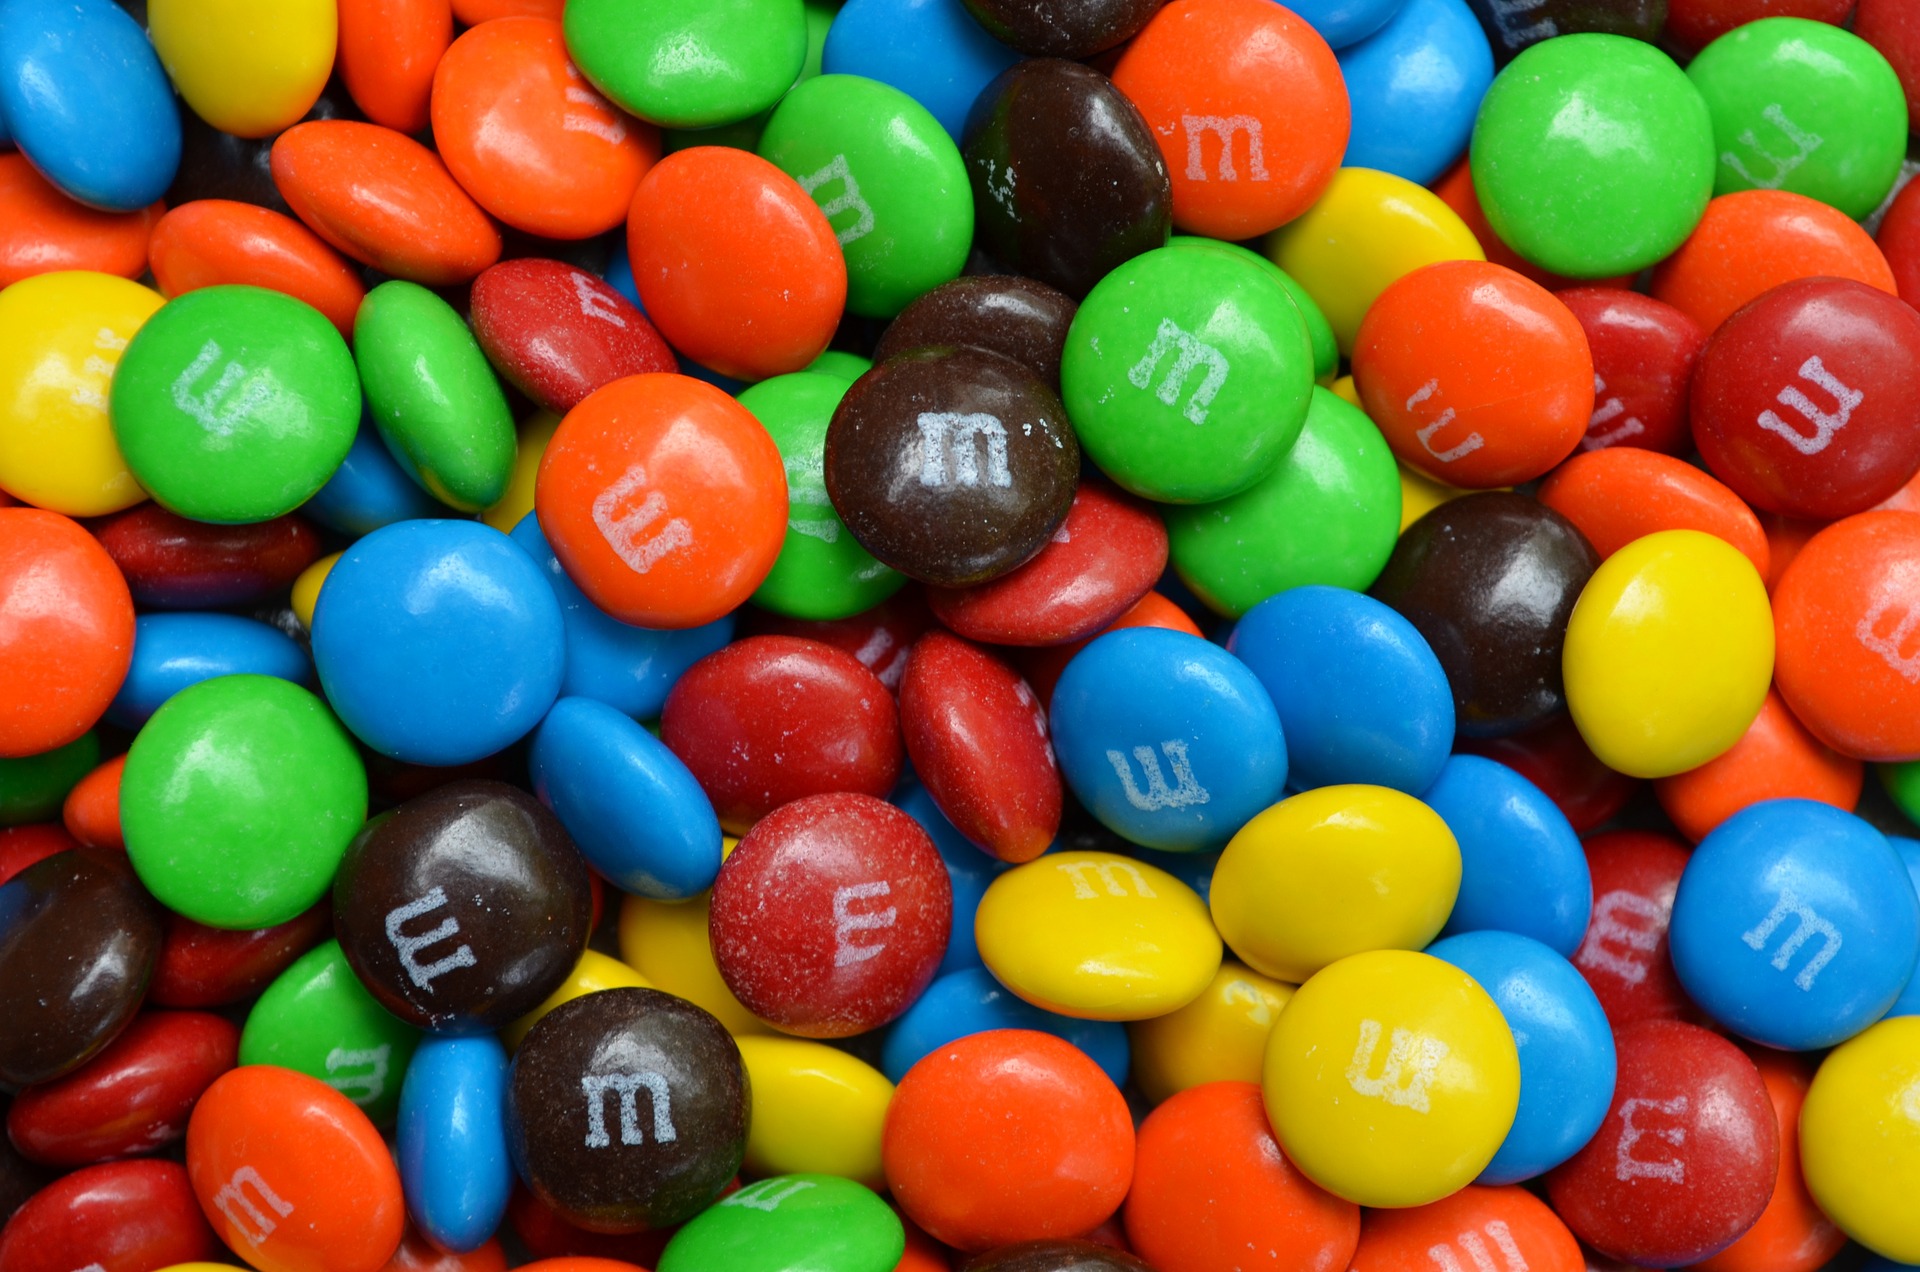 M&M's replaces cartoon 'spokescandies' with Maya Rudolph after